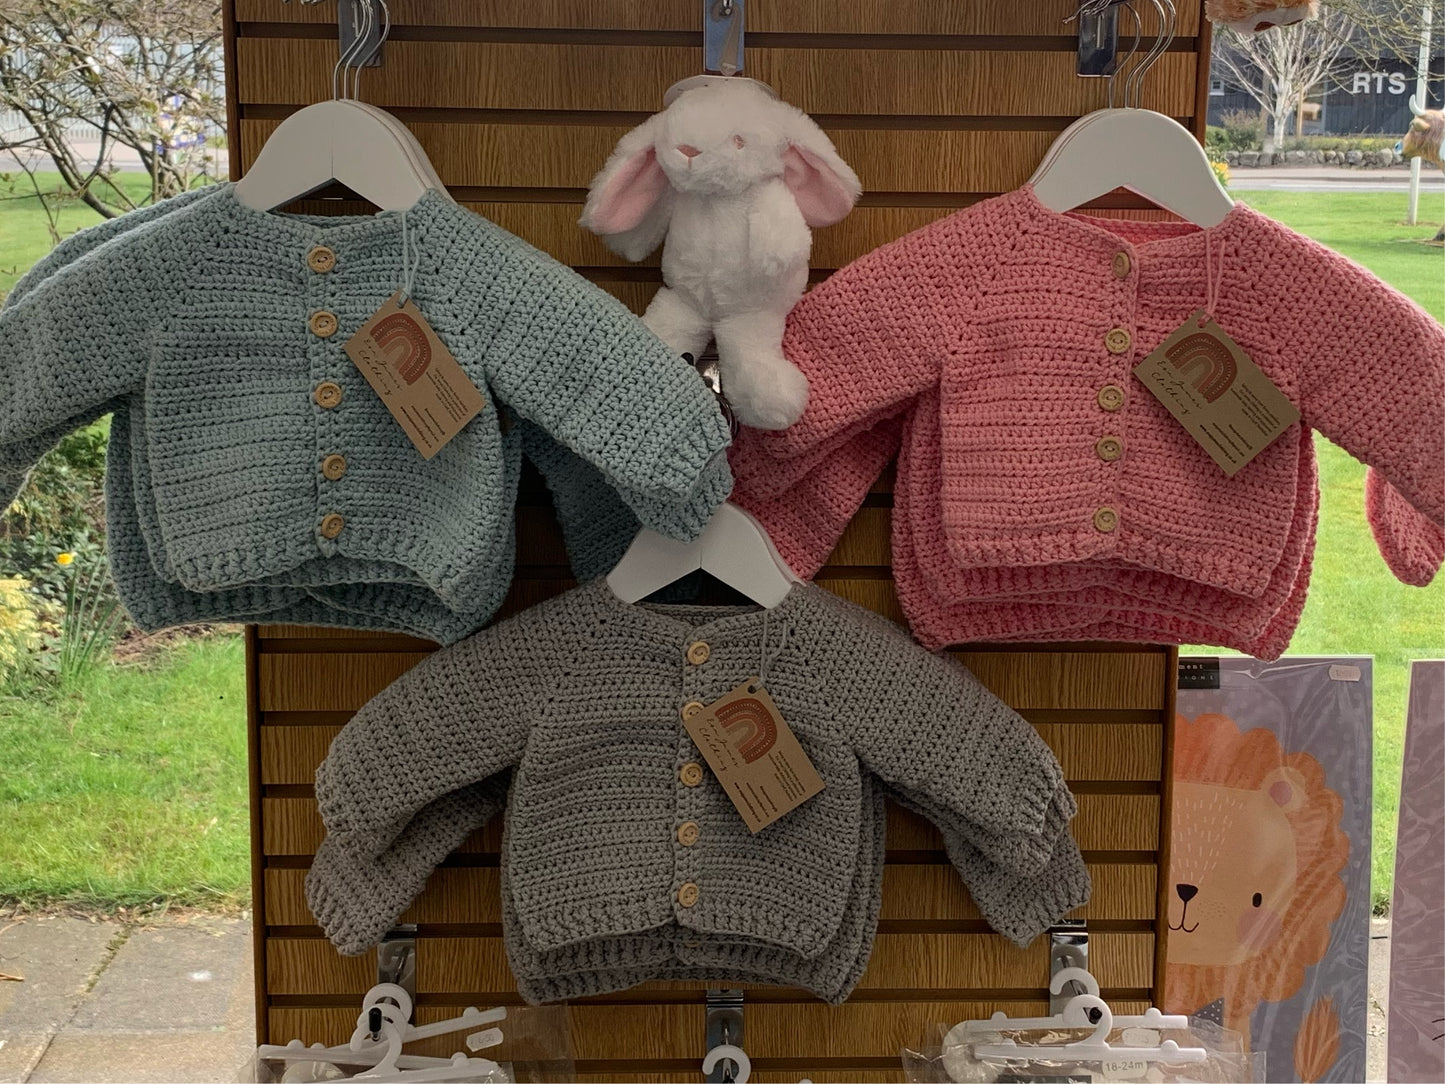 Light blue, grey and light pink baby cardigans in a local shop